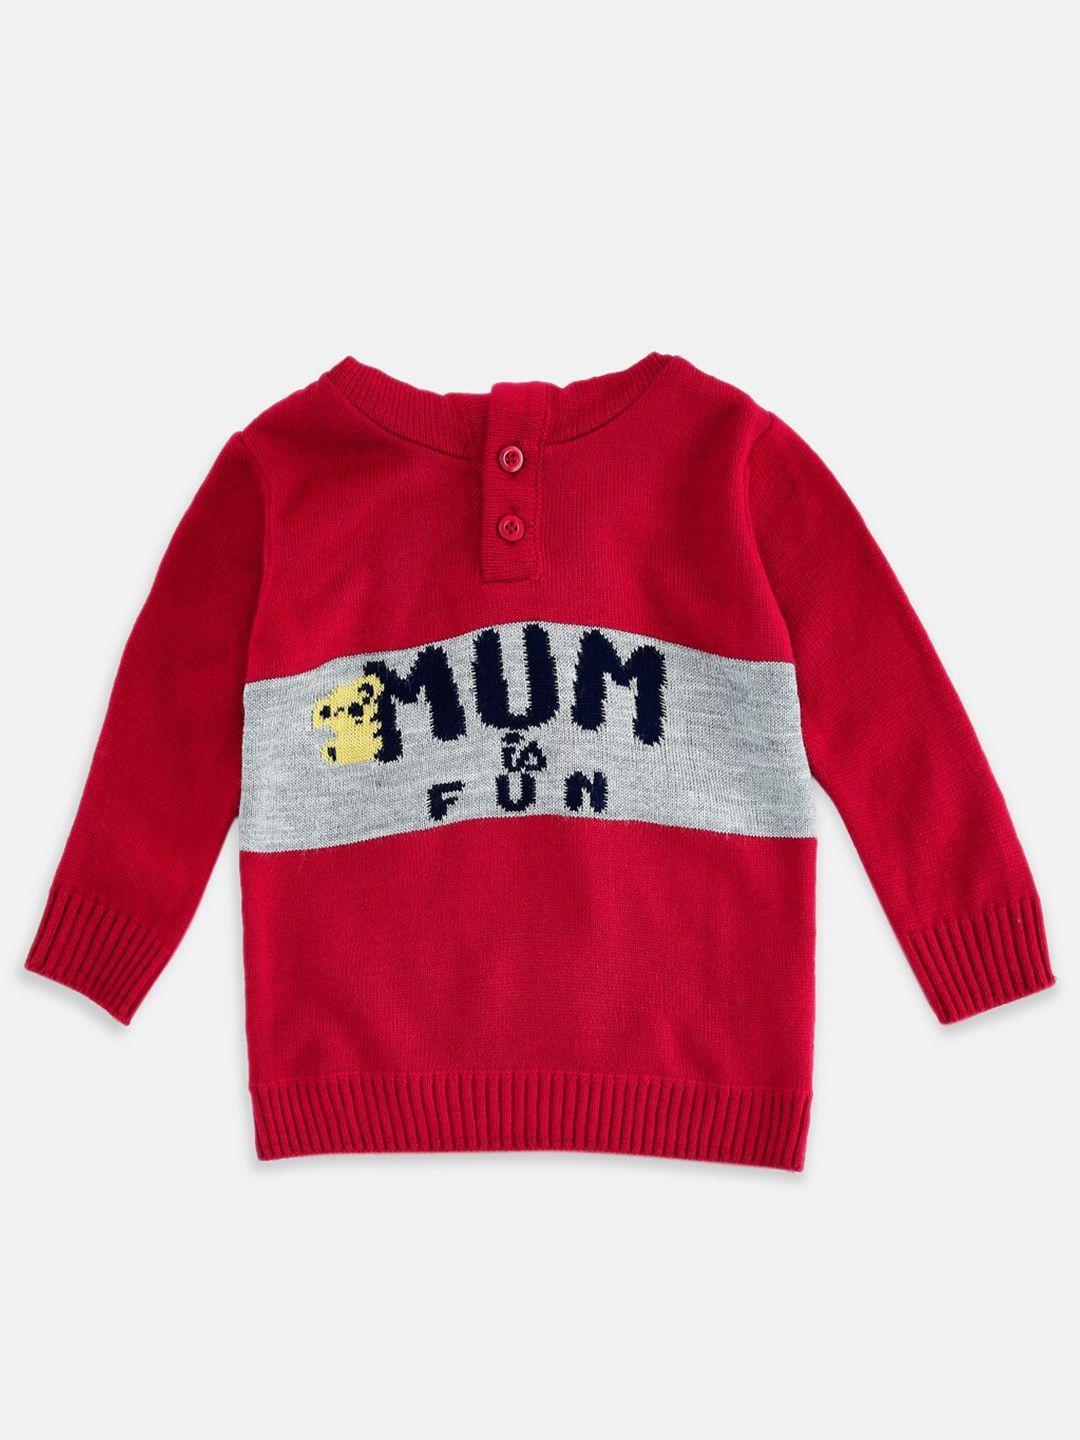 pantaloons-baby-boys-red-&-black-typography-printed-pullover